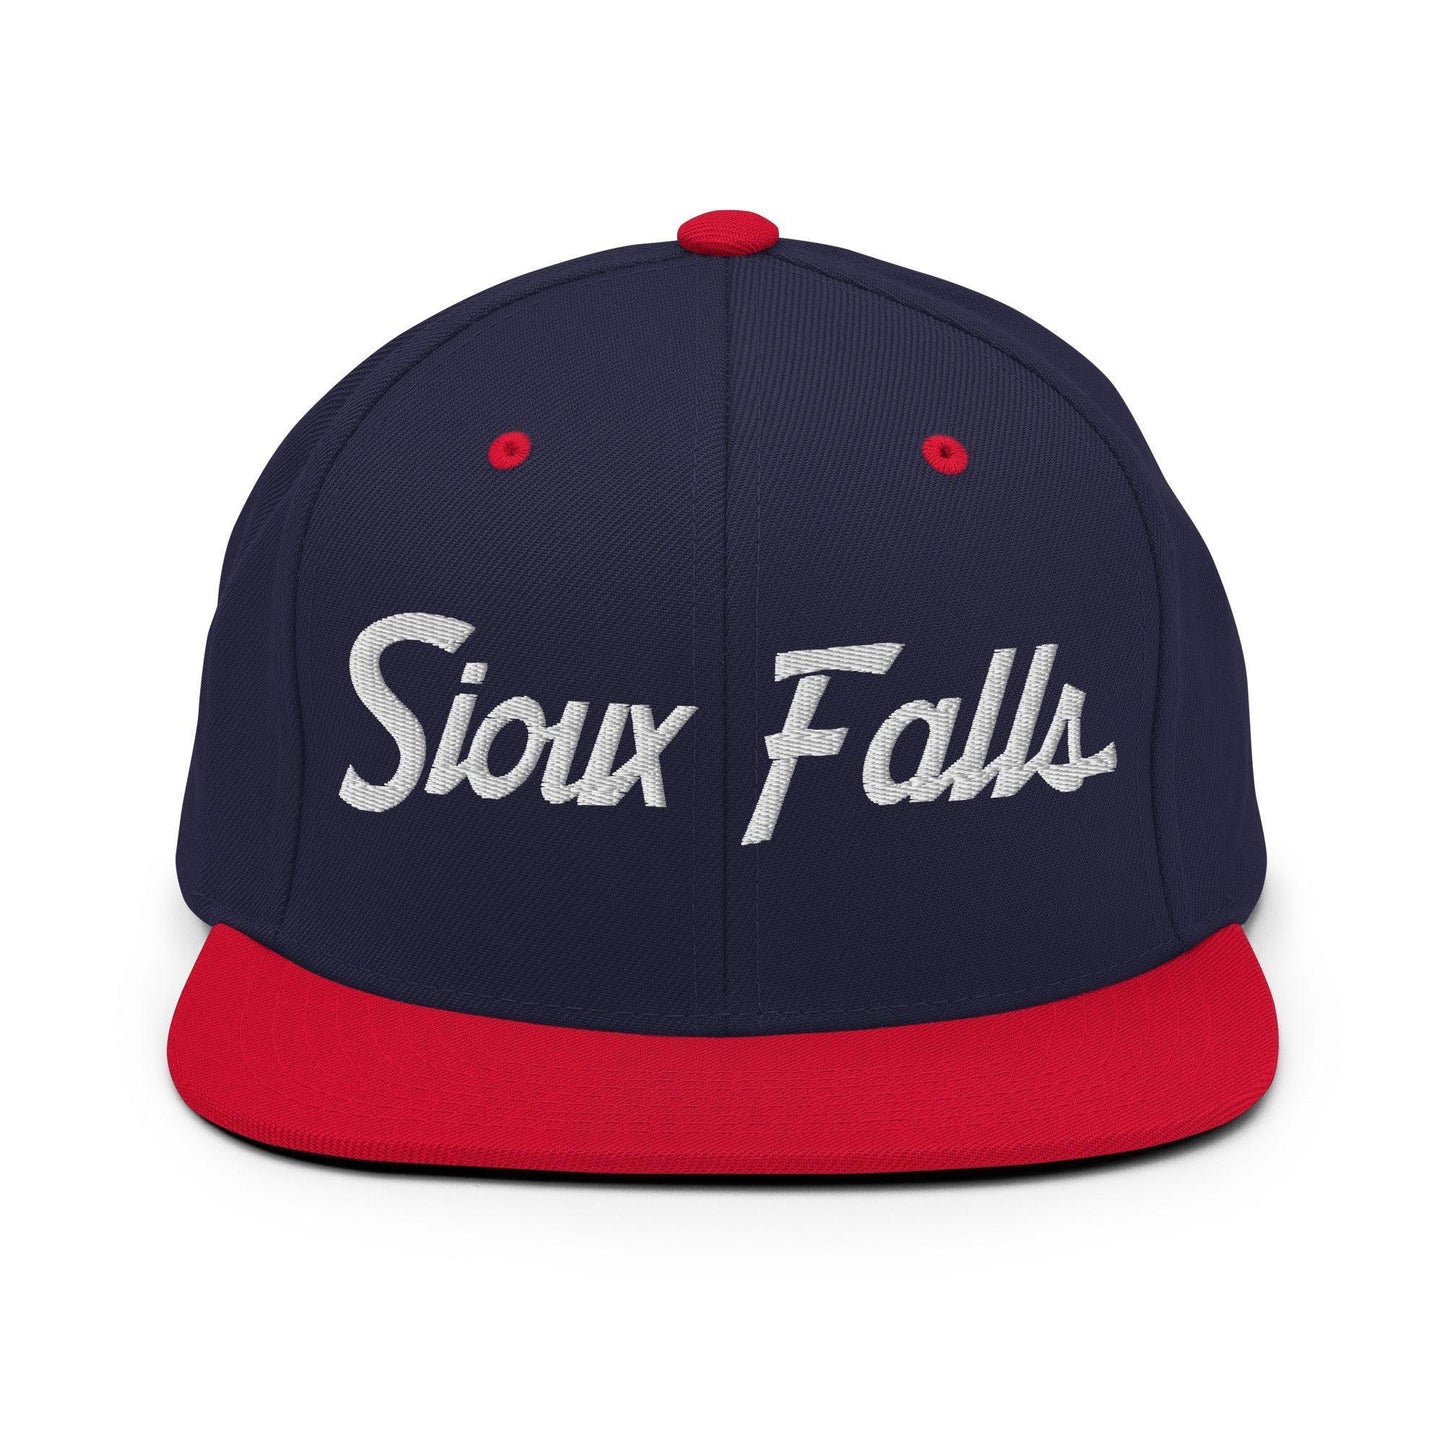 Sioux Falls Script Snapback Hat Navy/ Red